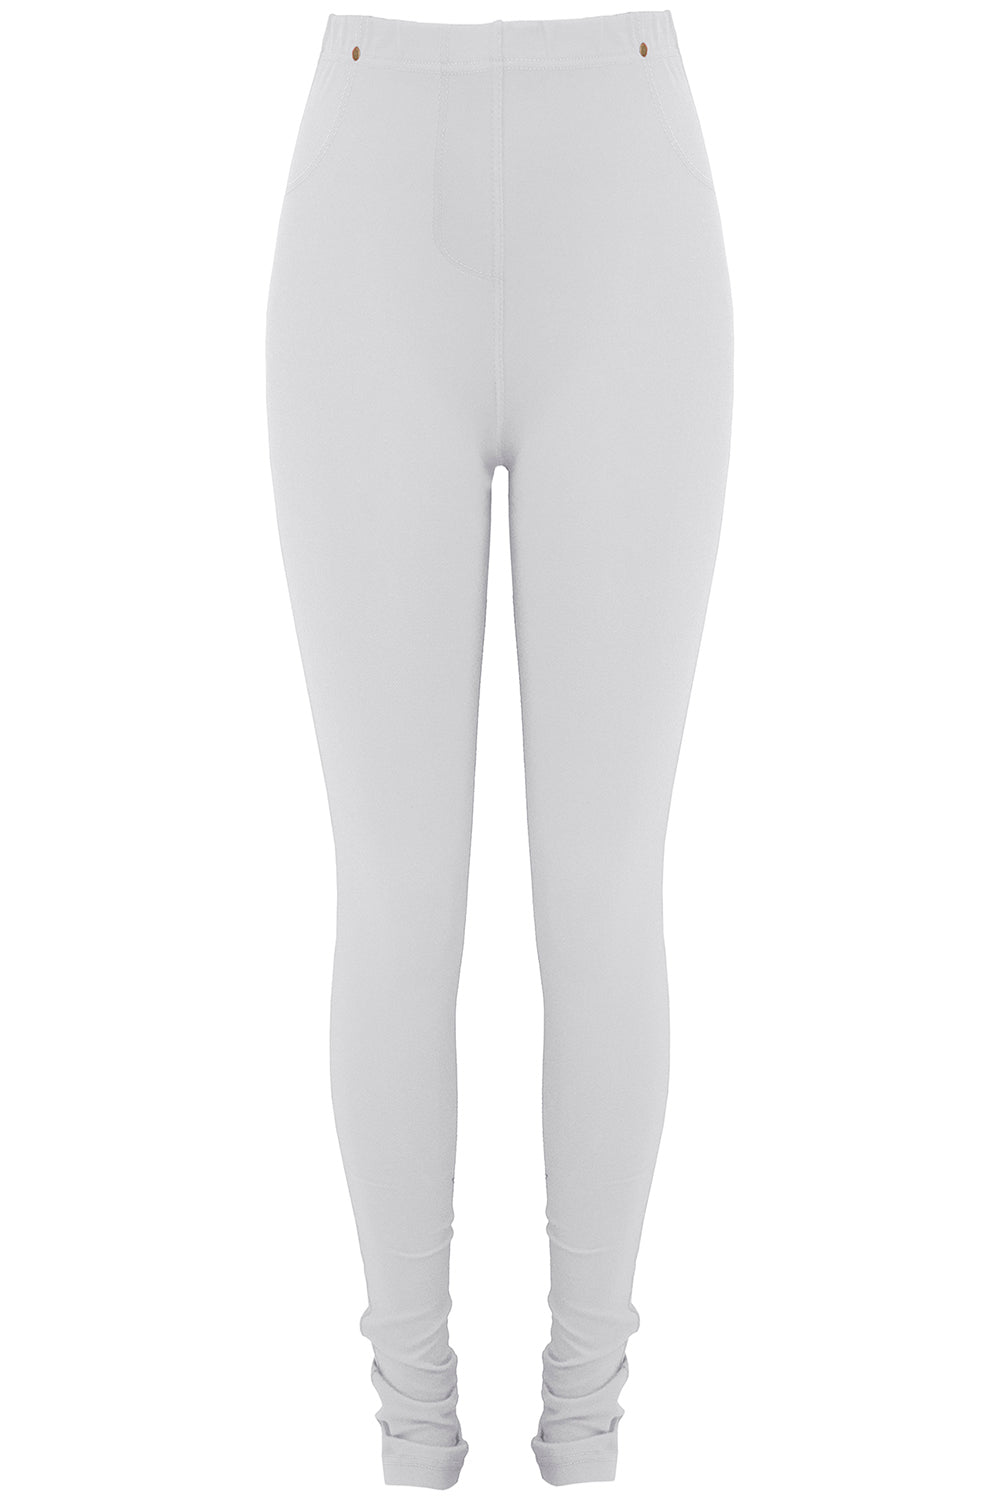 Plus Size Stretch Fit Skinny Jeggings